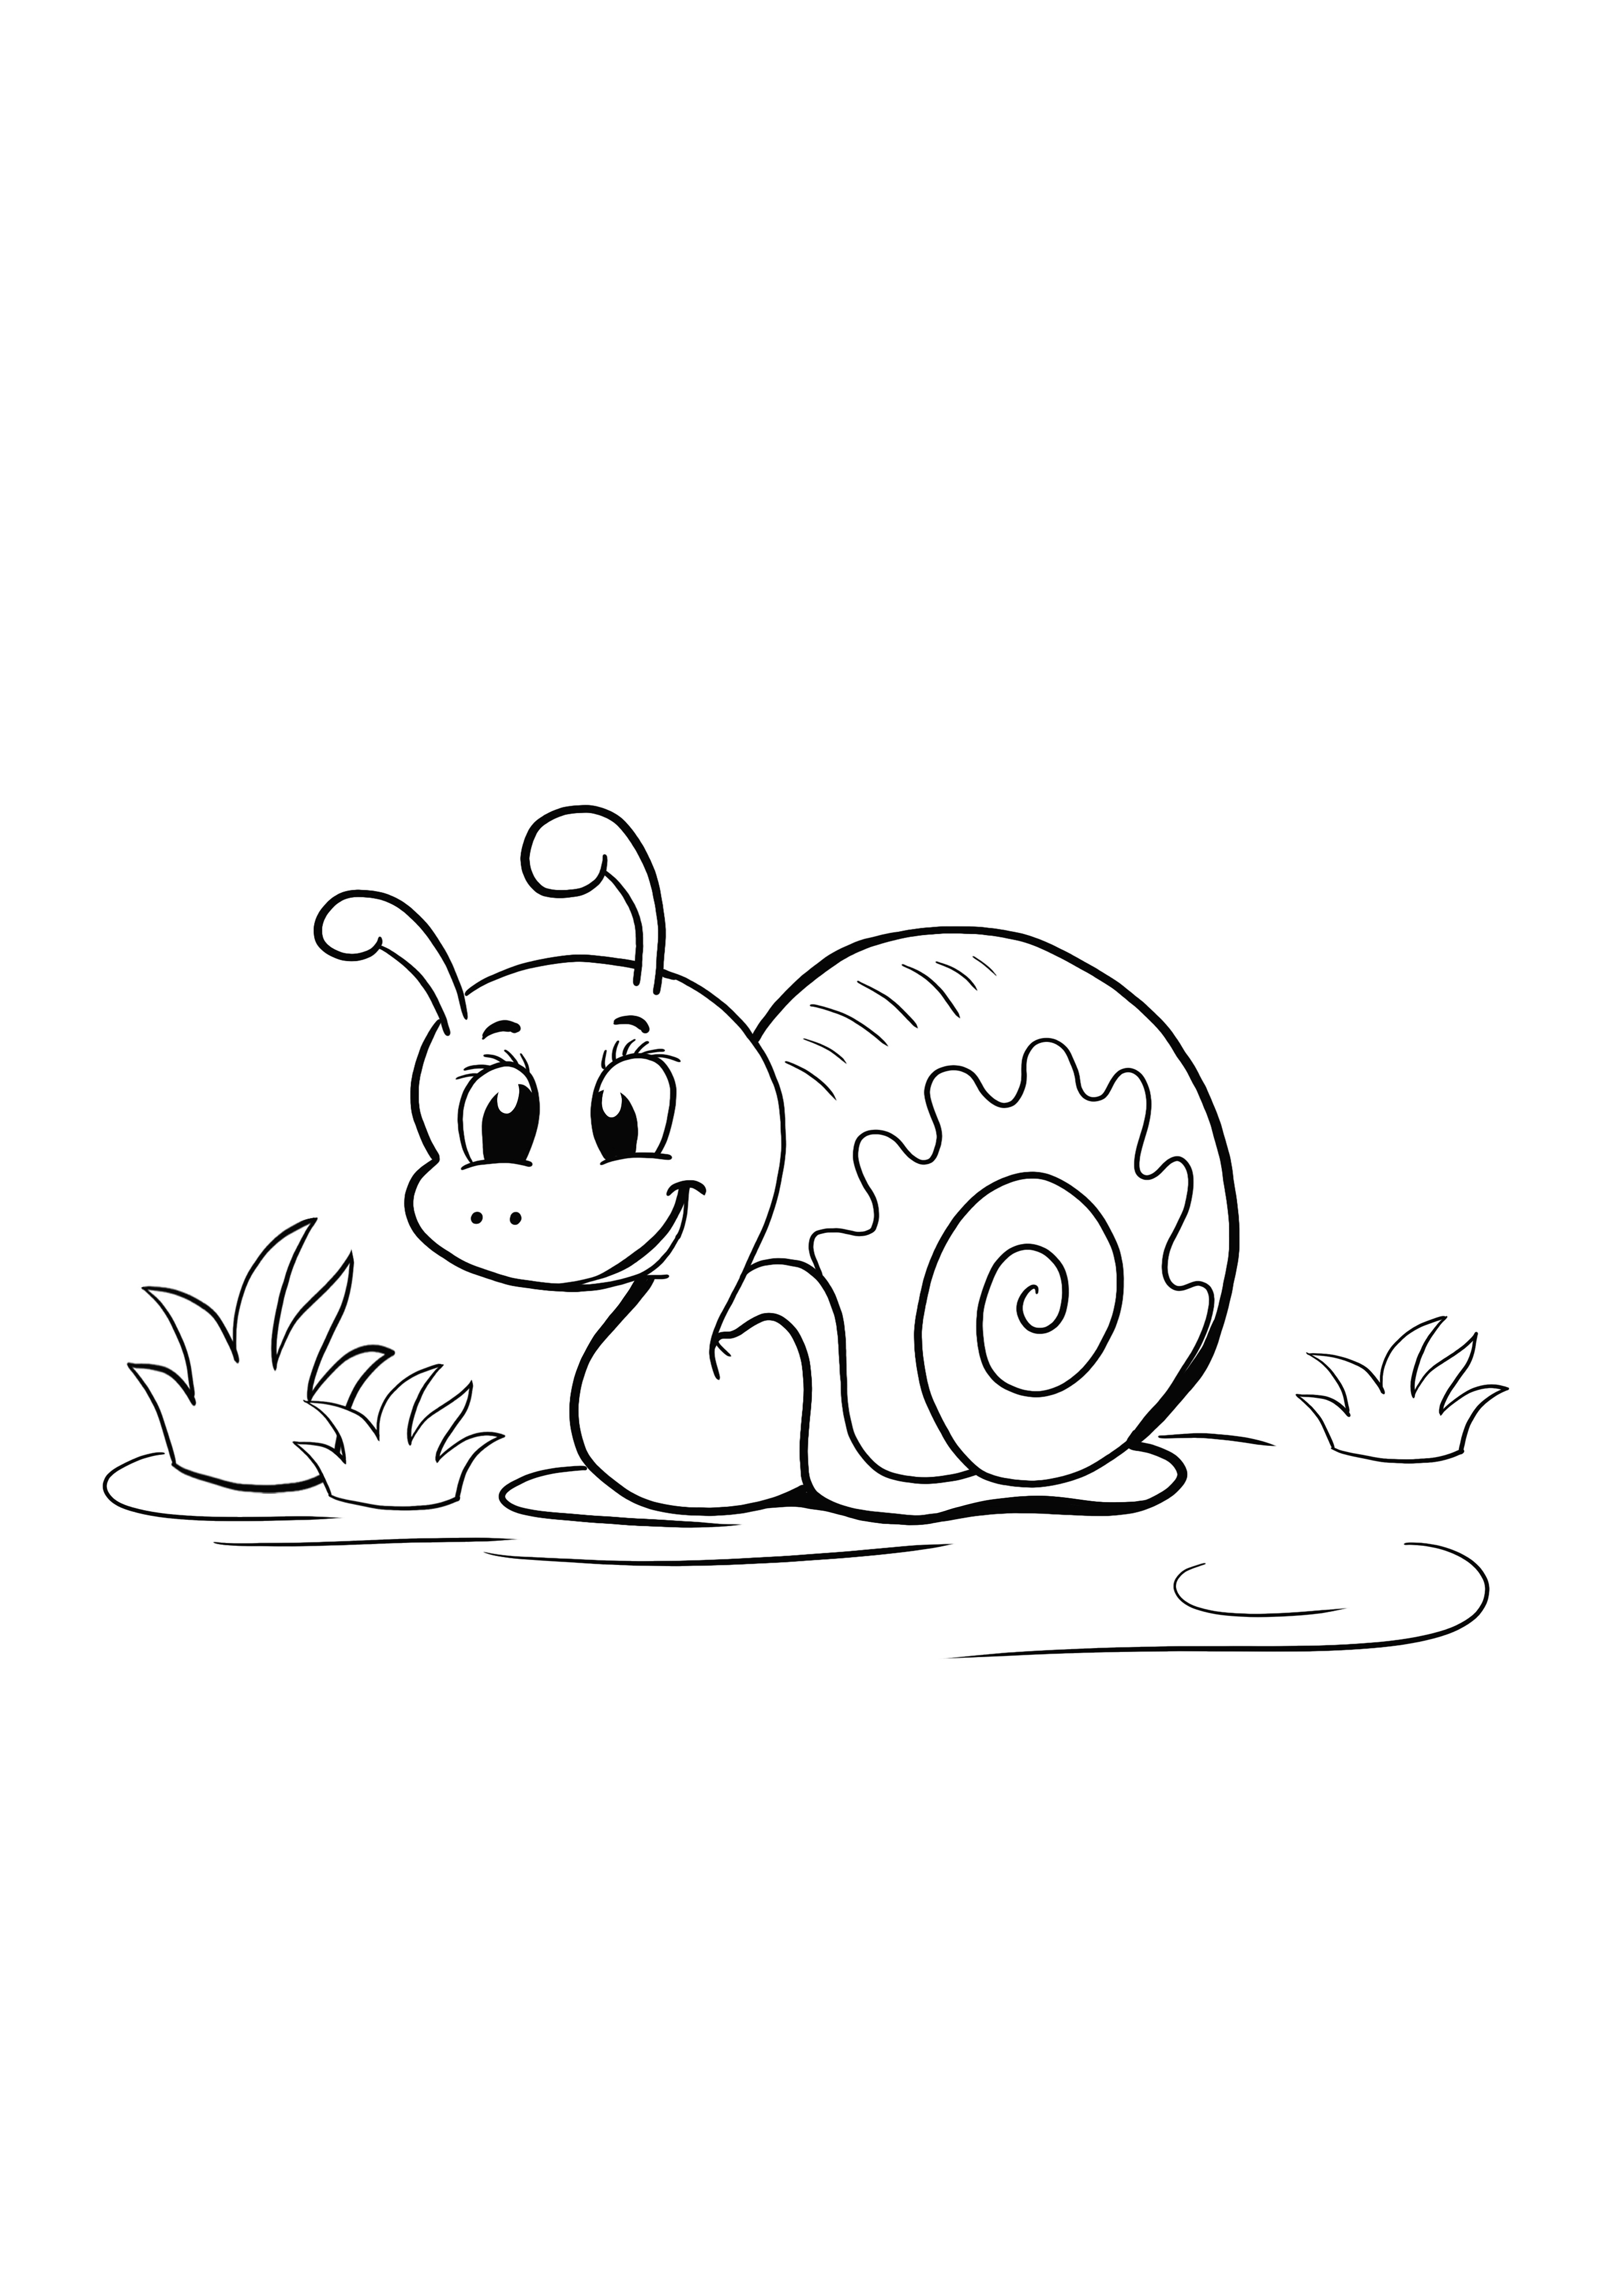 funny snail free printable and coloring page